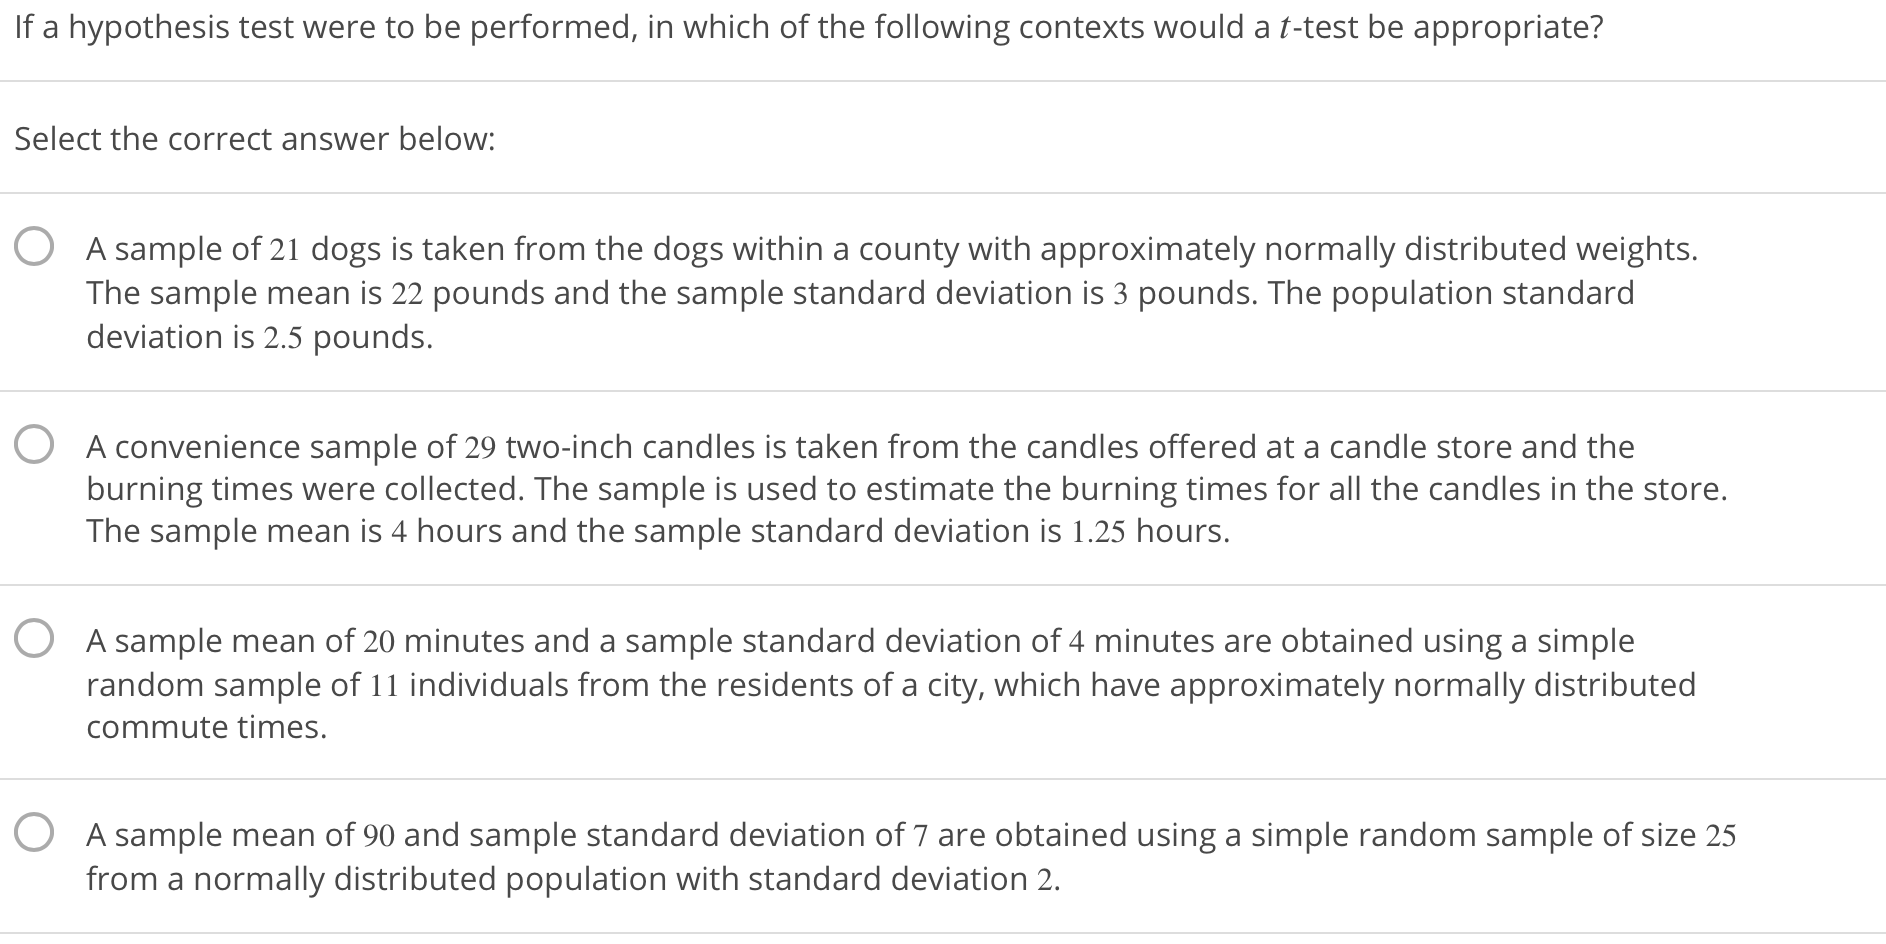 If a hypothesis test were to be performed, in which of the following contexts would a t-test be appropriate?
Select the correct answer below:
O
A sample of 21 dogs is taken from the dogs within a county with approximately normally distributed weights
The sample mean is 22 pounds and the sample standard deviation is 3 pounds. The population standard
deviation is 2.5 pounds.
O
A convenience sample of 29 two-inch candles is taken from the candles offered at a candle store and the
burning times were collected. The sample is used to estimate the burning times for all the candles in the store.
The sample mean is 4 hours and the sample standard deviation is 1.25 hours.
O
A sample mean of 20 minutes and a sample standard deviation of 4 minutes are obtained using a simple
random sample of 11 individuals from the residents of a city, which have approximately normally distributed
commute times.
O
A sample mean of 90 and sample standard deviation of 7 are obtained using a simple random sample of size 25
from a normally distributed population with standard deviation 2.
